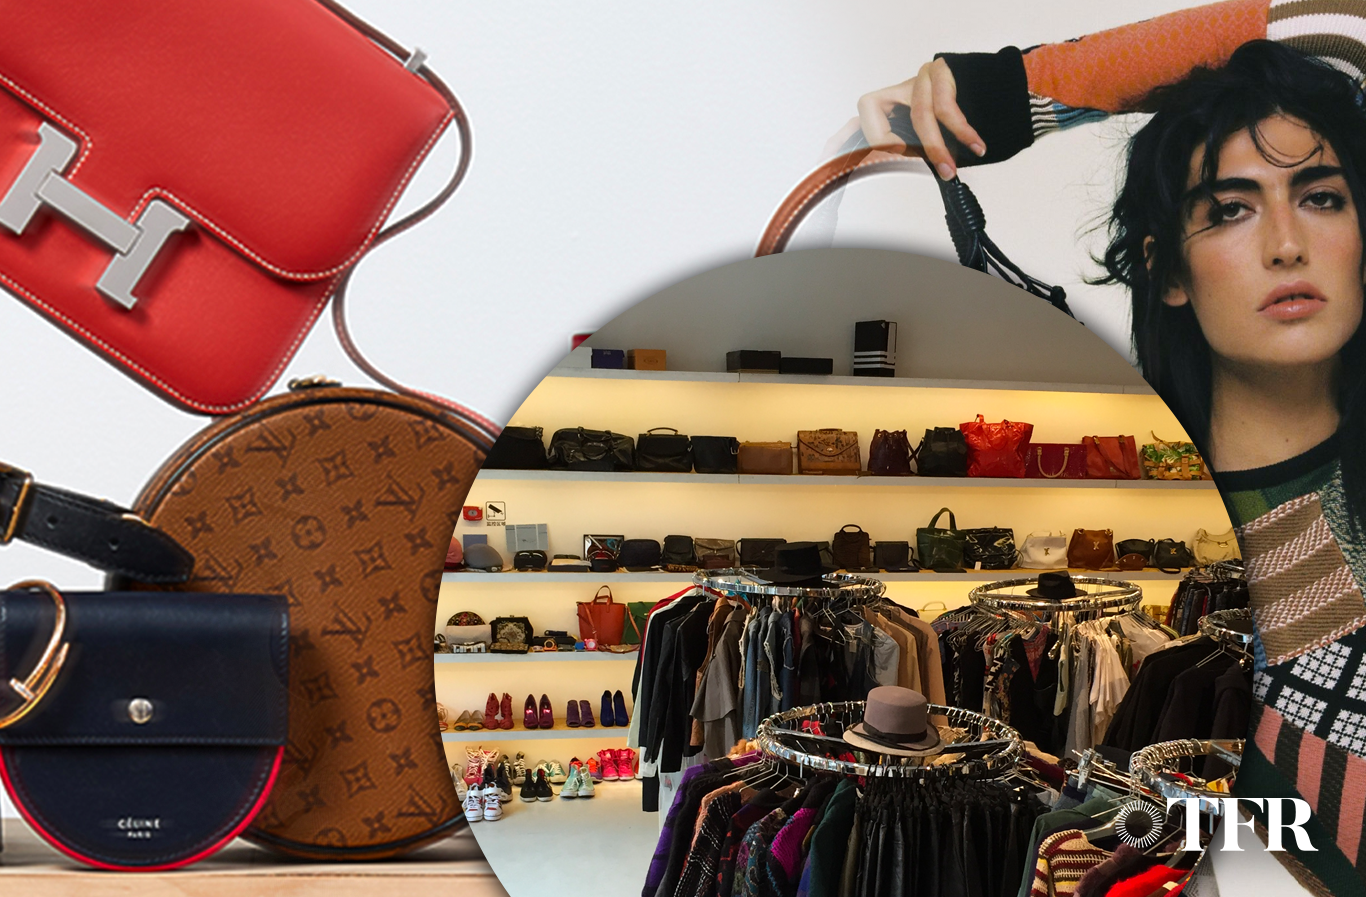 Get second-hand luxury brand items at special prices! If you're in